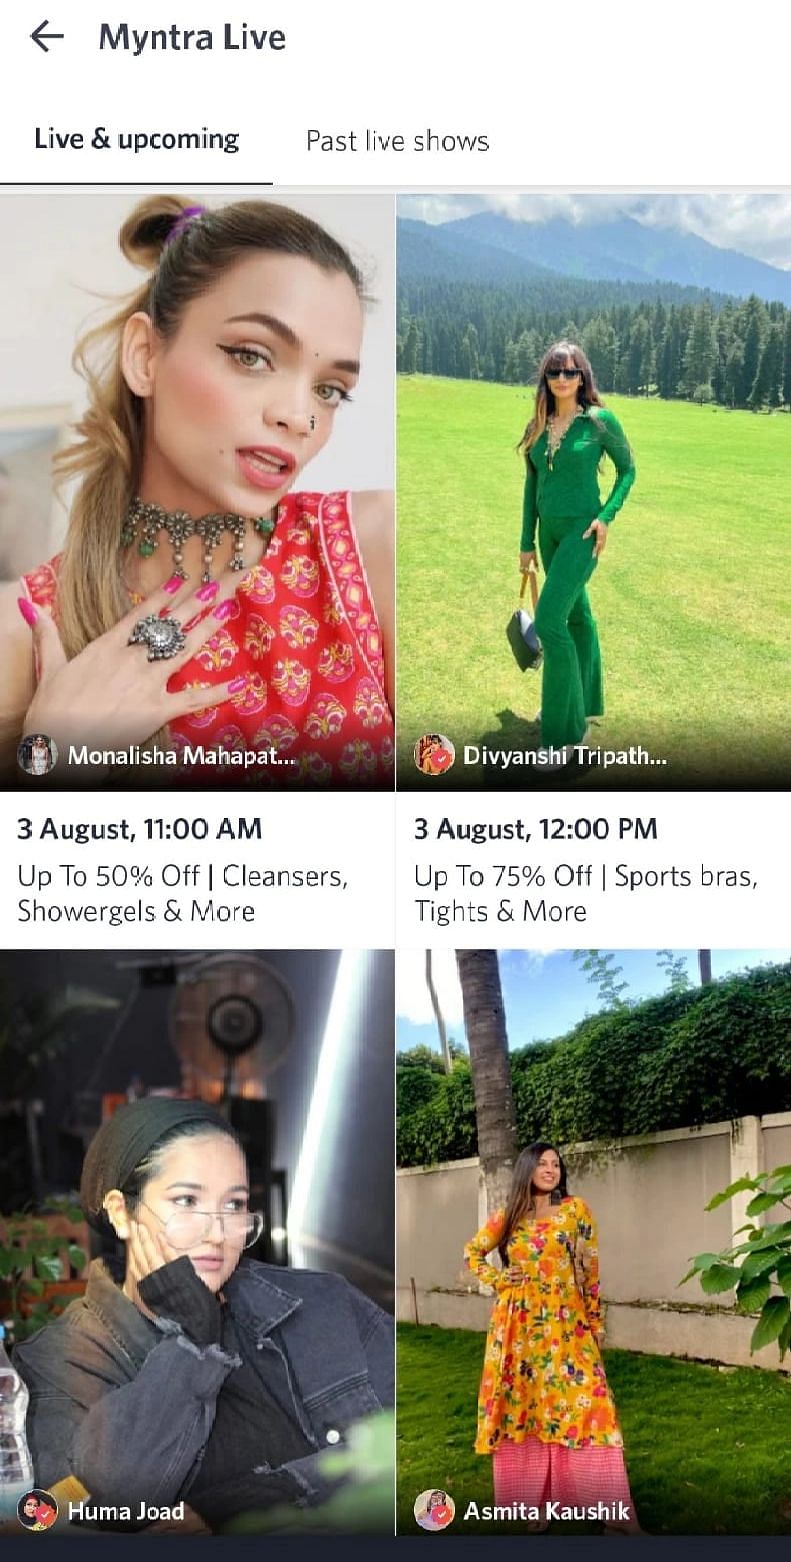 A screenshot of the 'live' section of Myntra's app